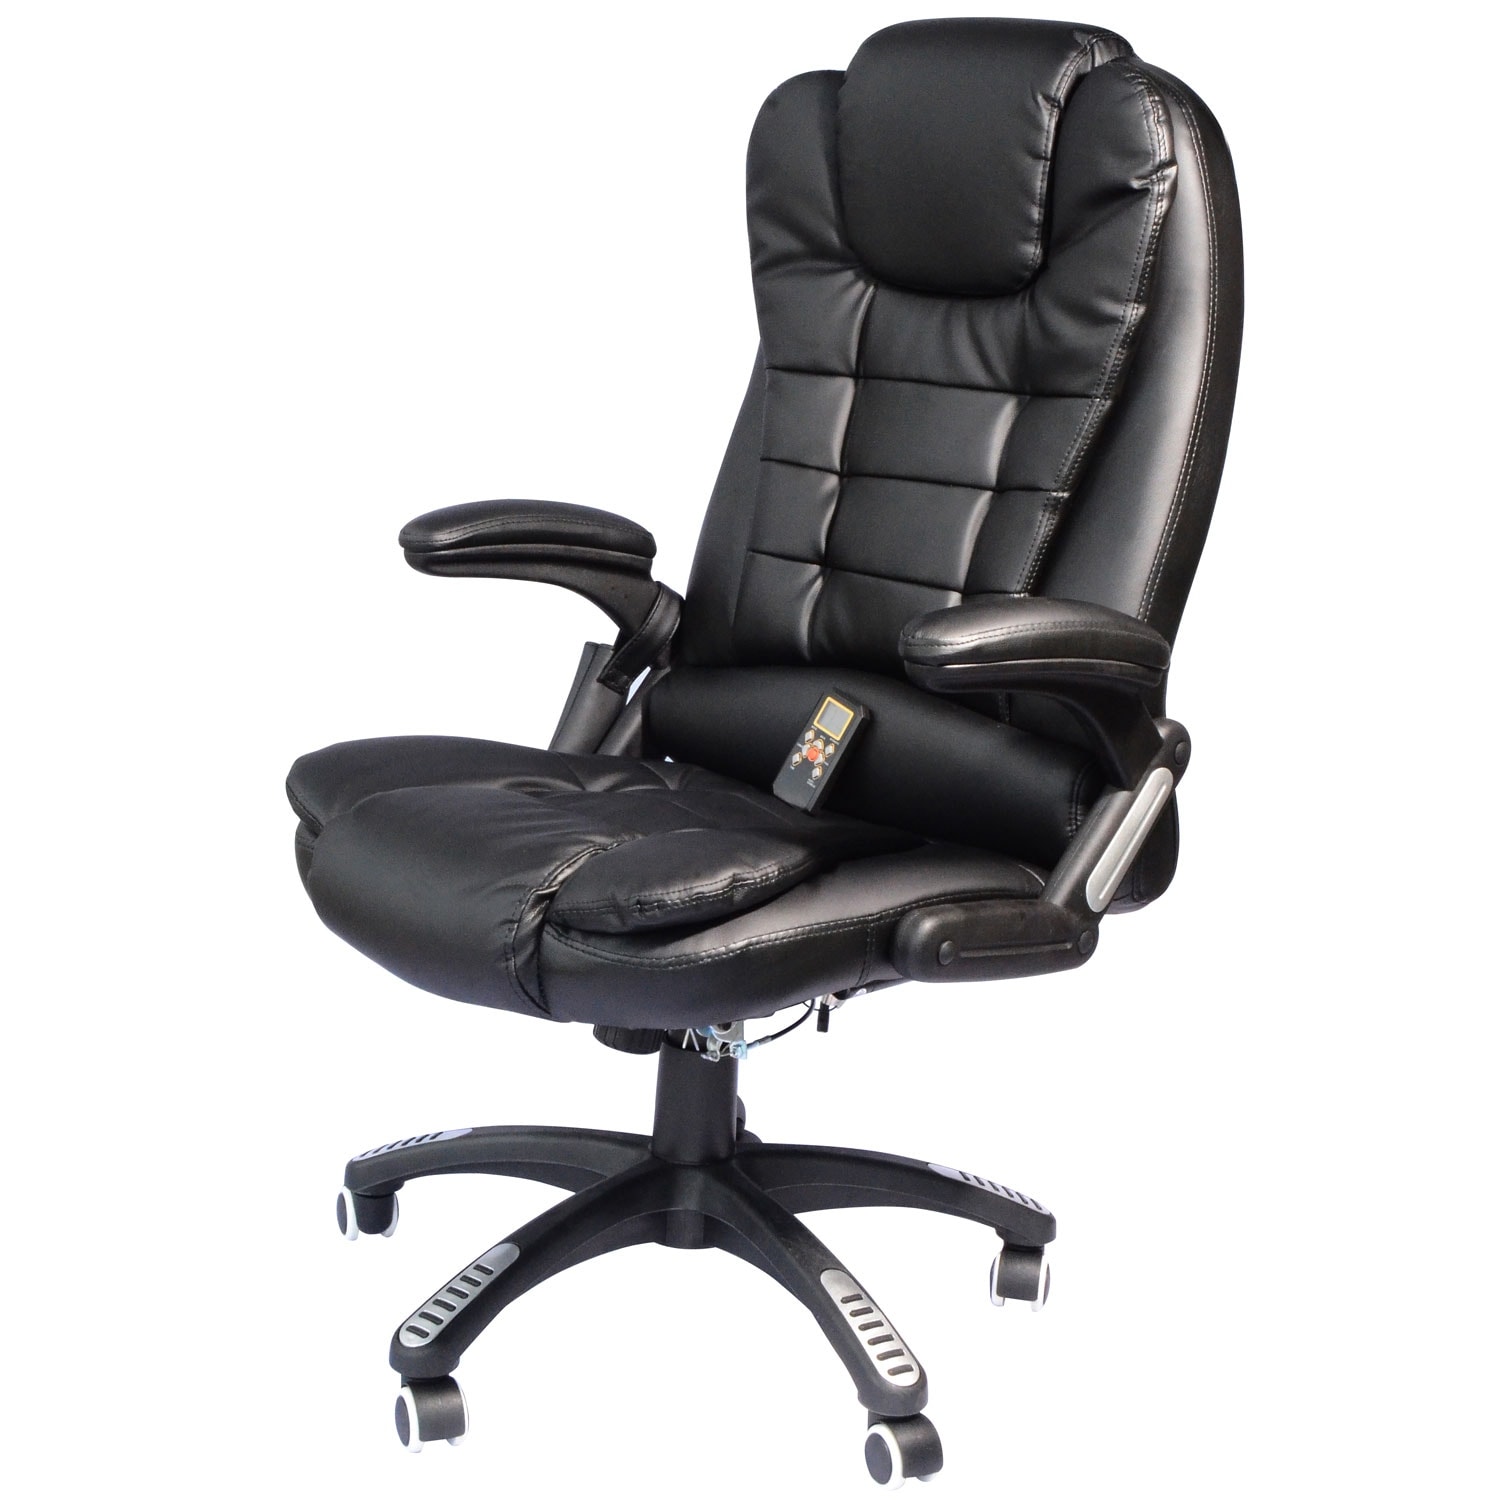 6-Point Vibration Massage Office Chair High Back Faux Leather wWheel Footrest 